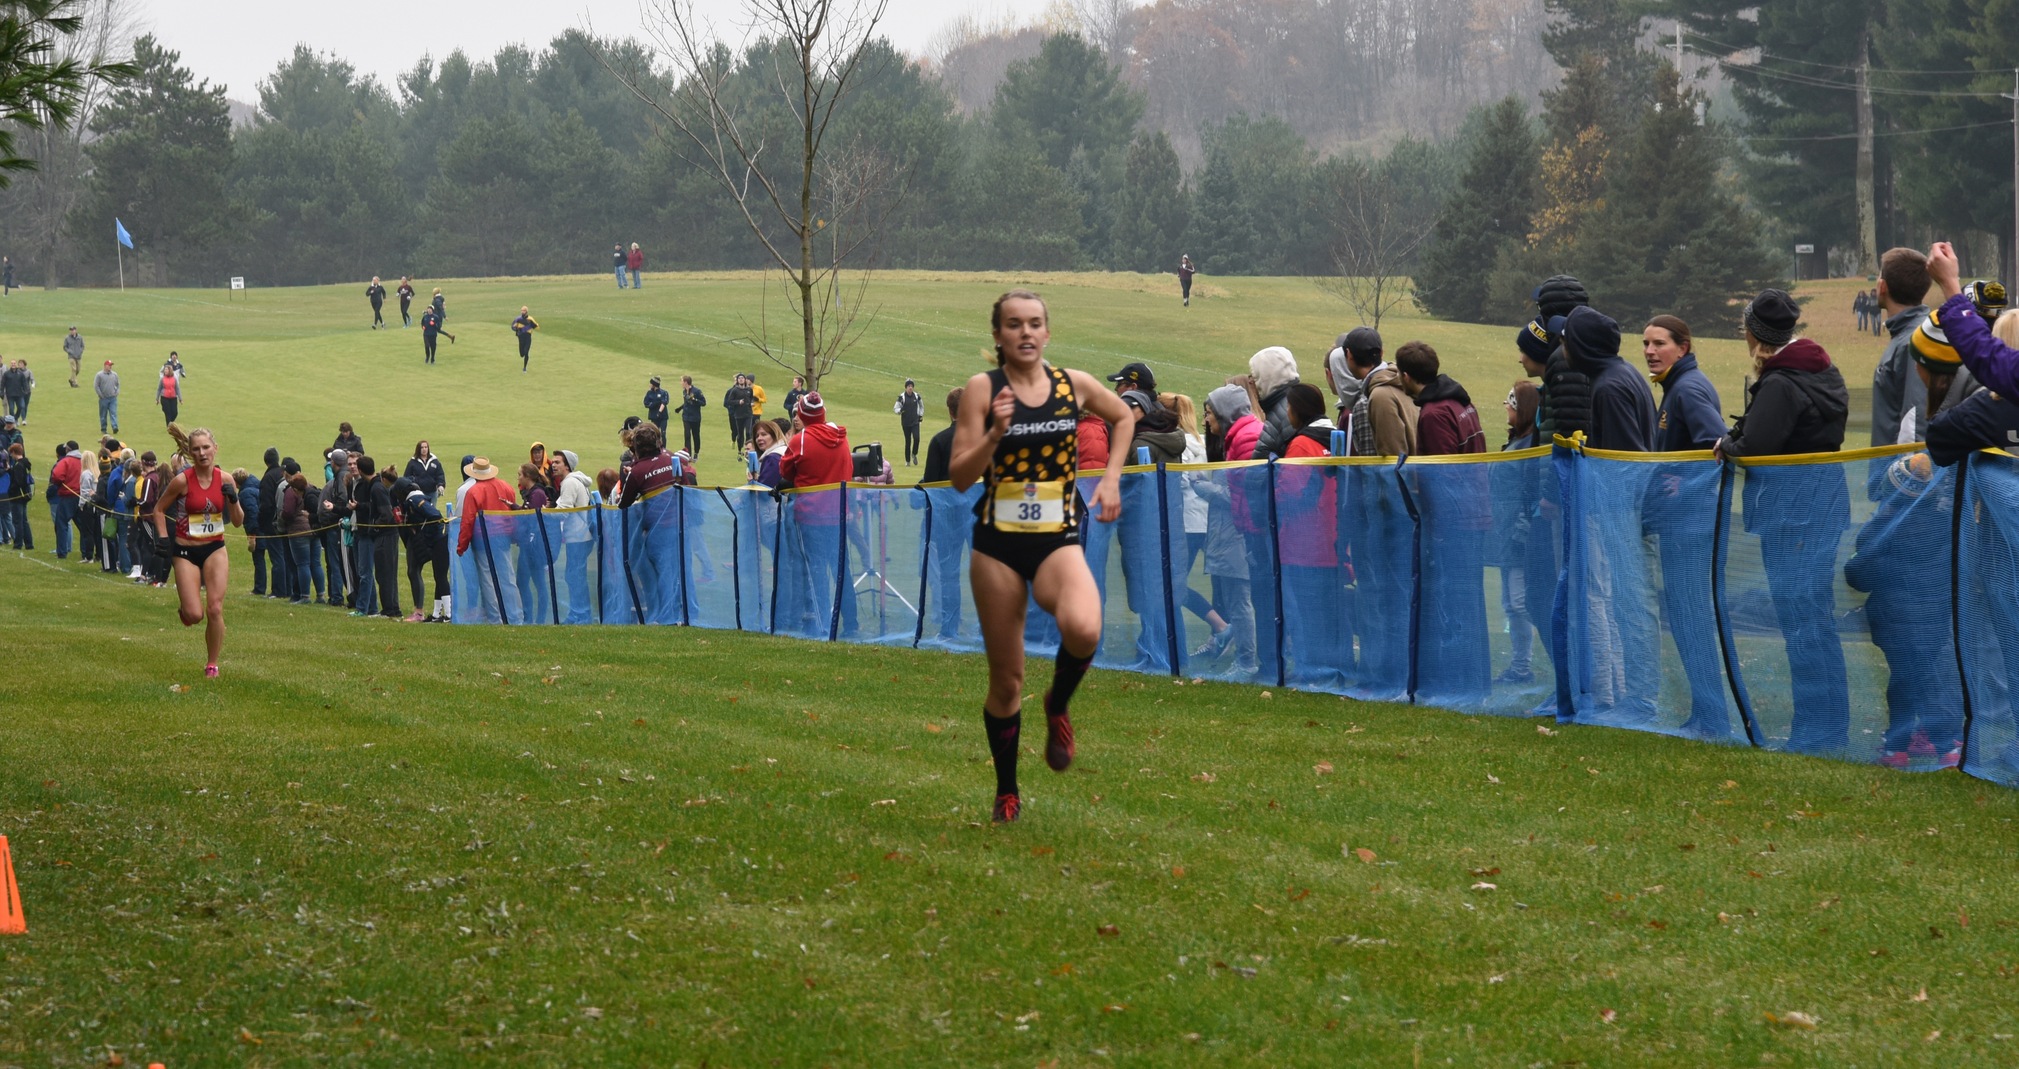 Evlyn Noone finished sixth for the Titans in her WIAC Championship debut.